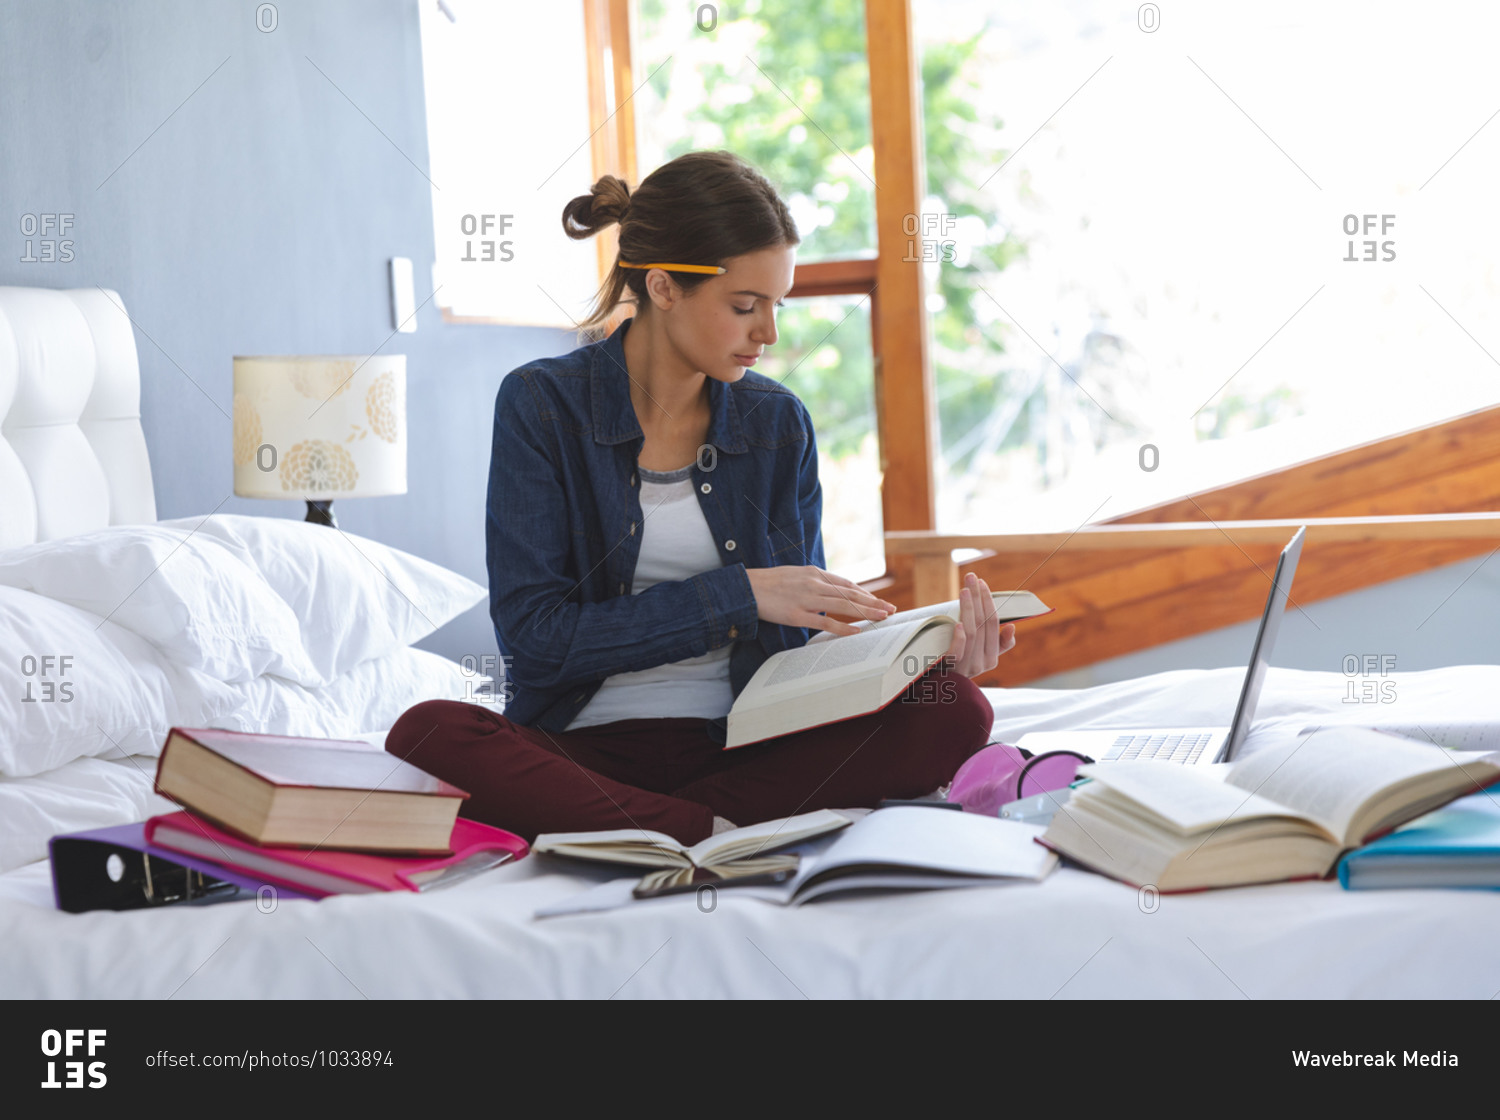 Caucasian woman spending time at home, sitting on bed in bedroom, studying from home, holding and reading book. Social distancing during Covid 19 Coronavirus quarantine lockdown.